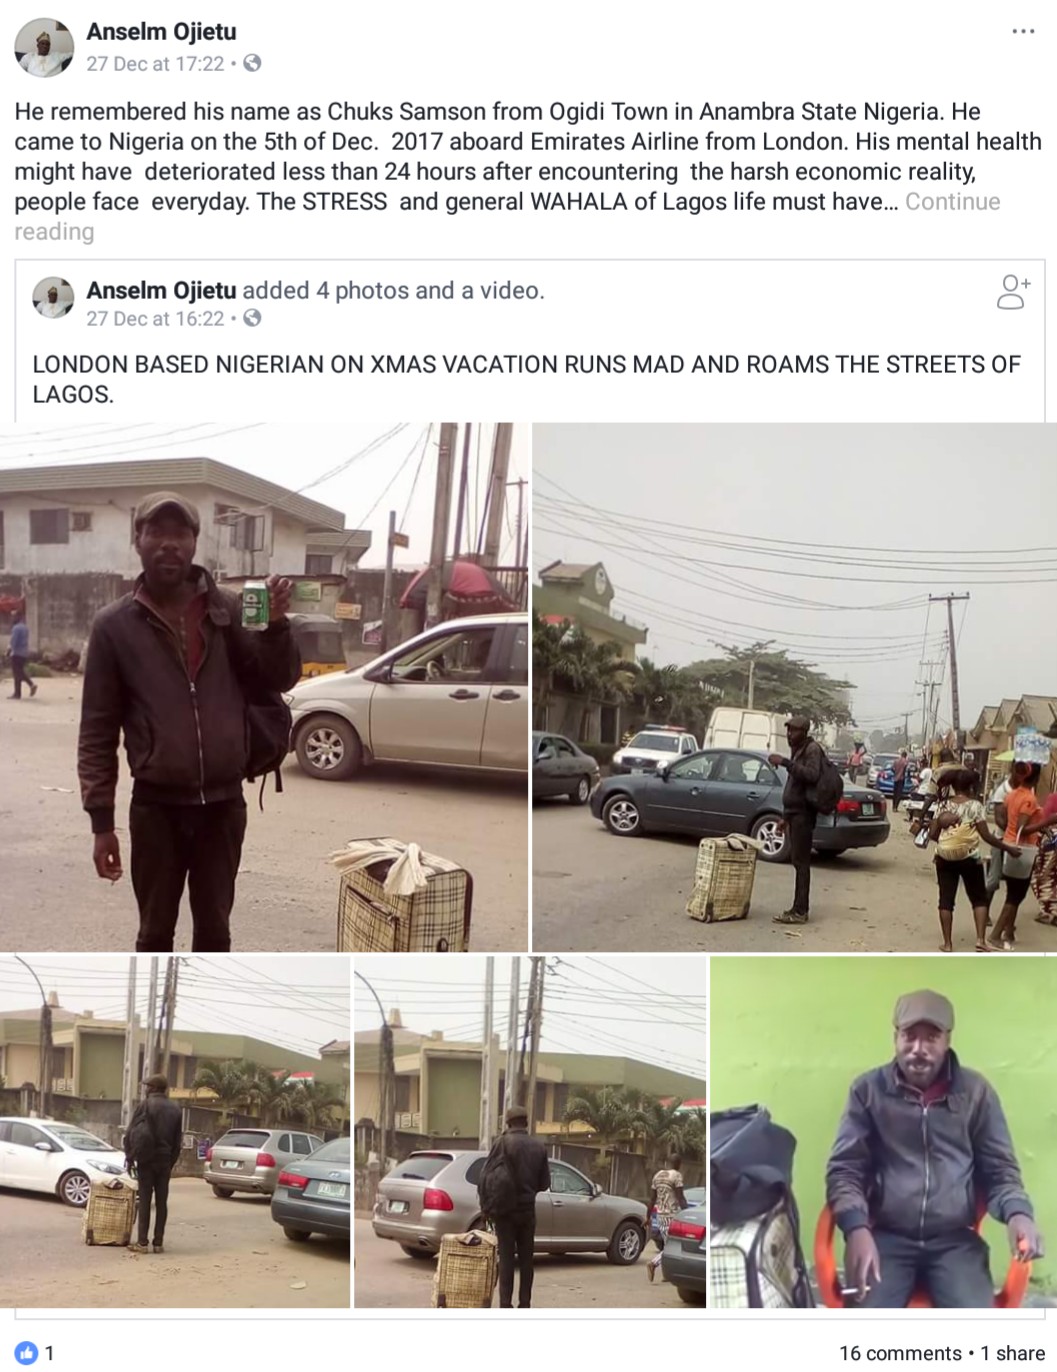 London Based Nigerian Man Who Came To Spend Christmas Holiday Runs Mad (2)